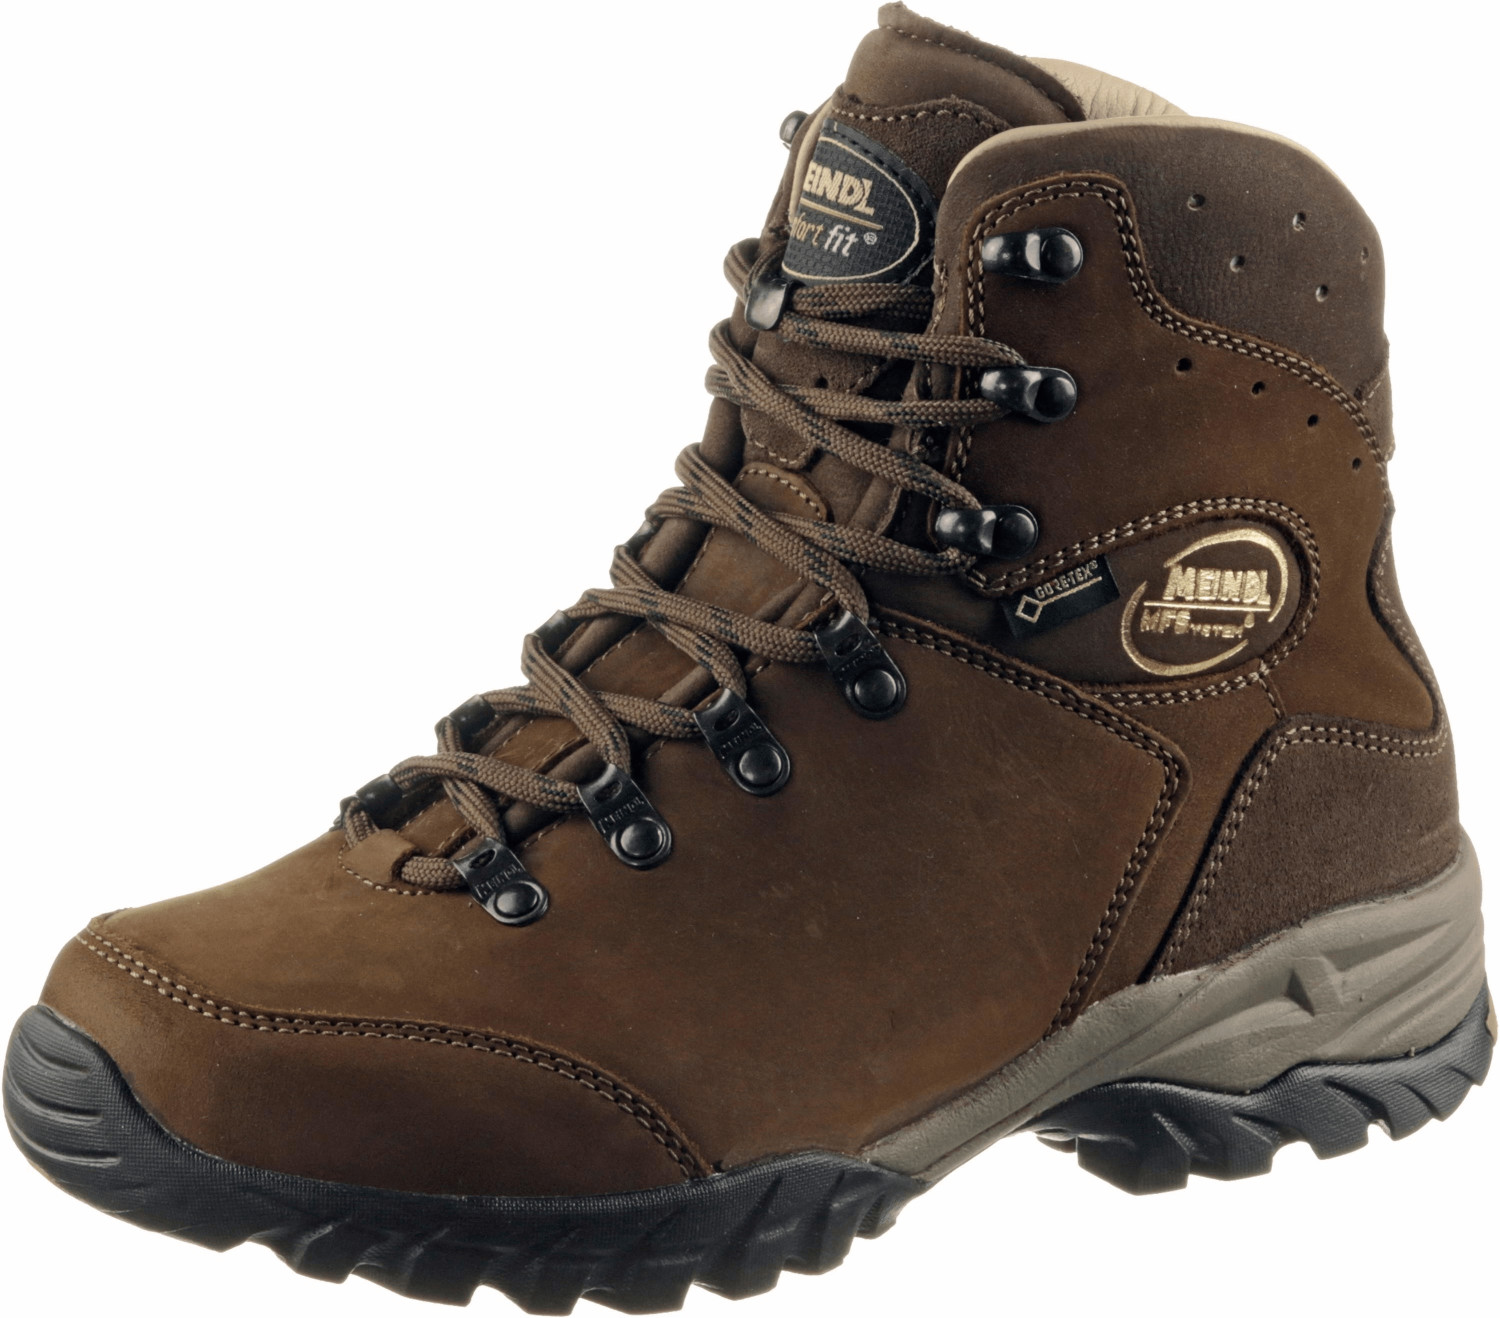 Buy Meindl Meran Lady GTX brown from £170.90 (Today) – Best Deals on ...